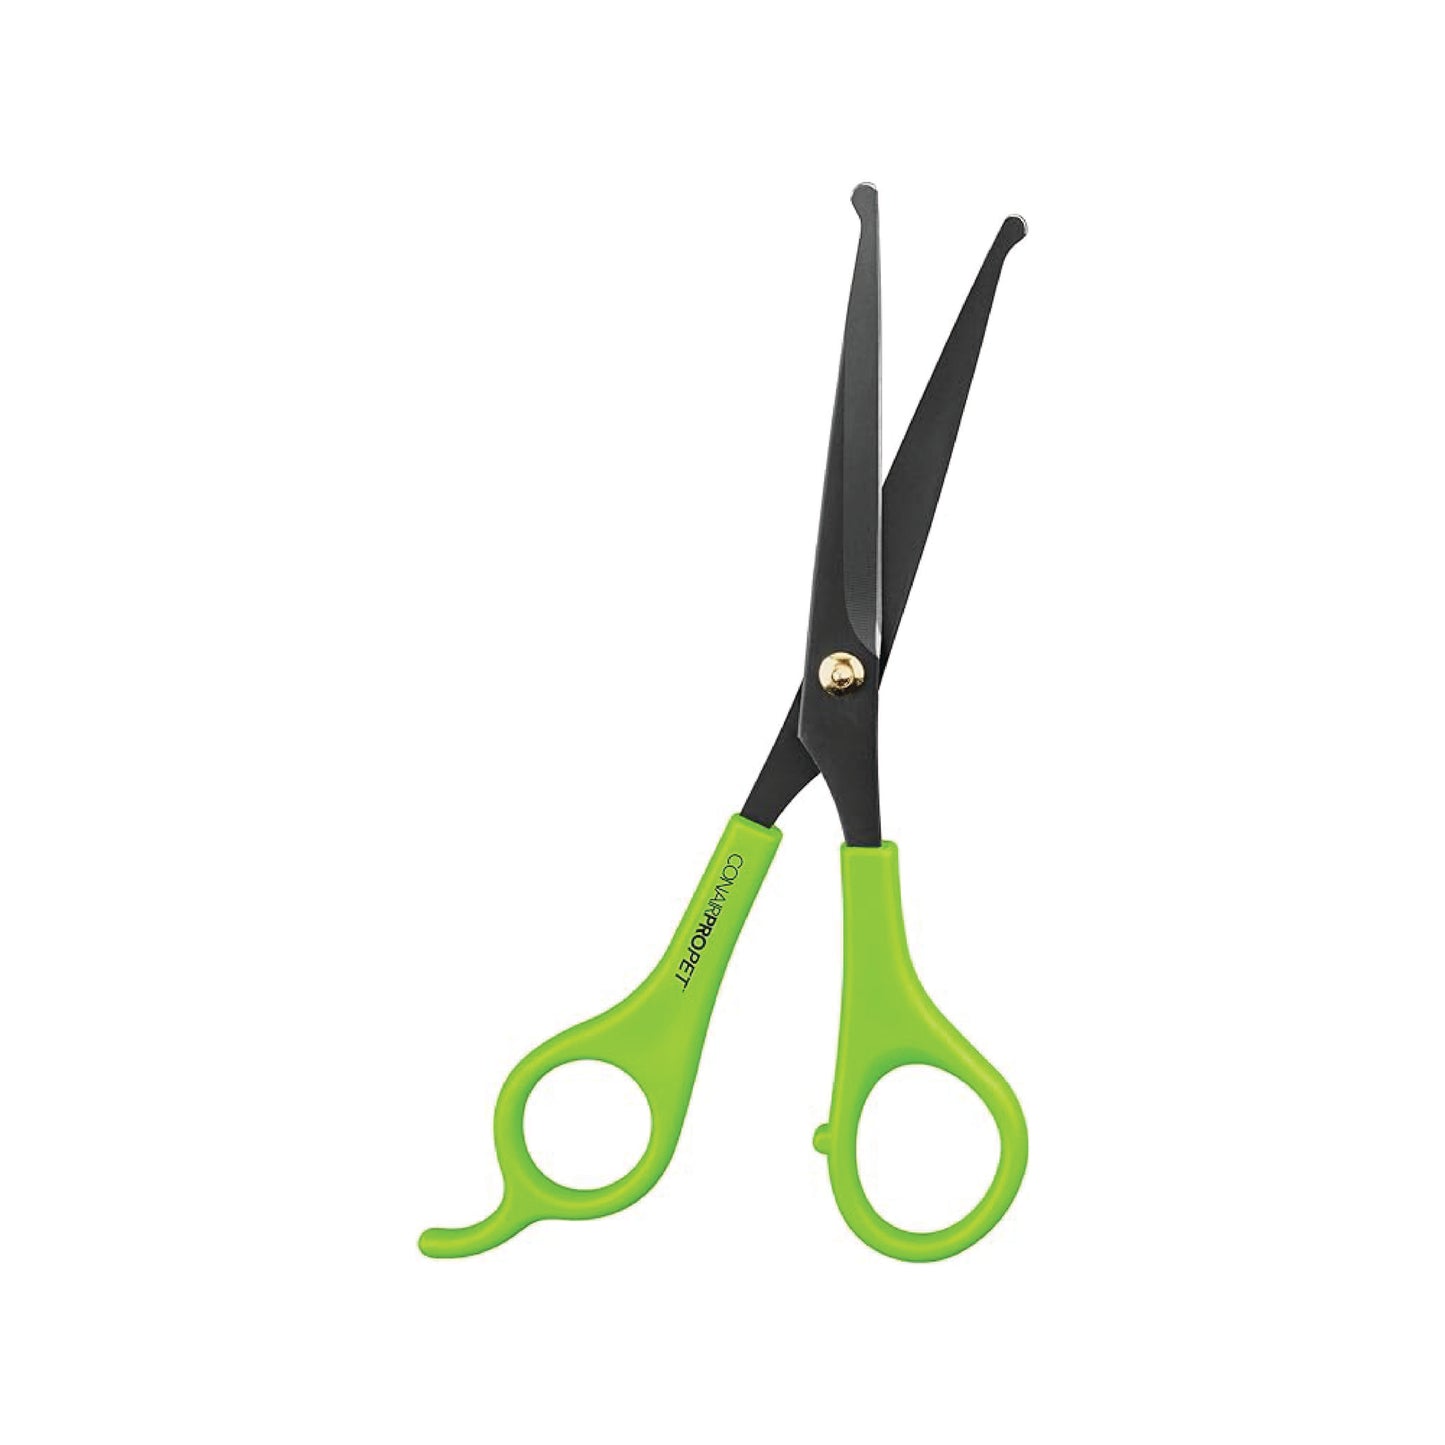 Conair Pro - Rounded-tip Grooming Scissors for Cat and Dog